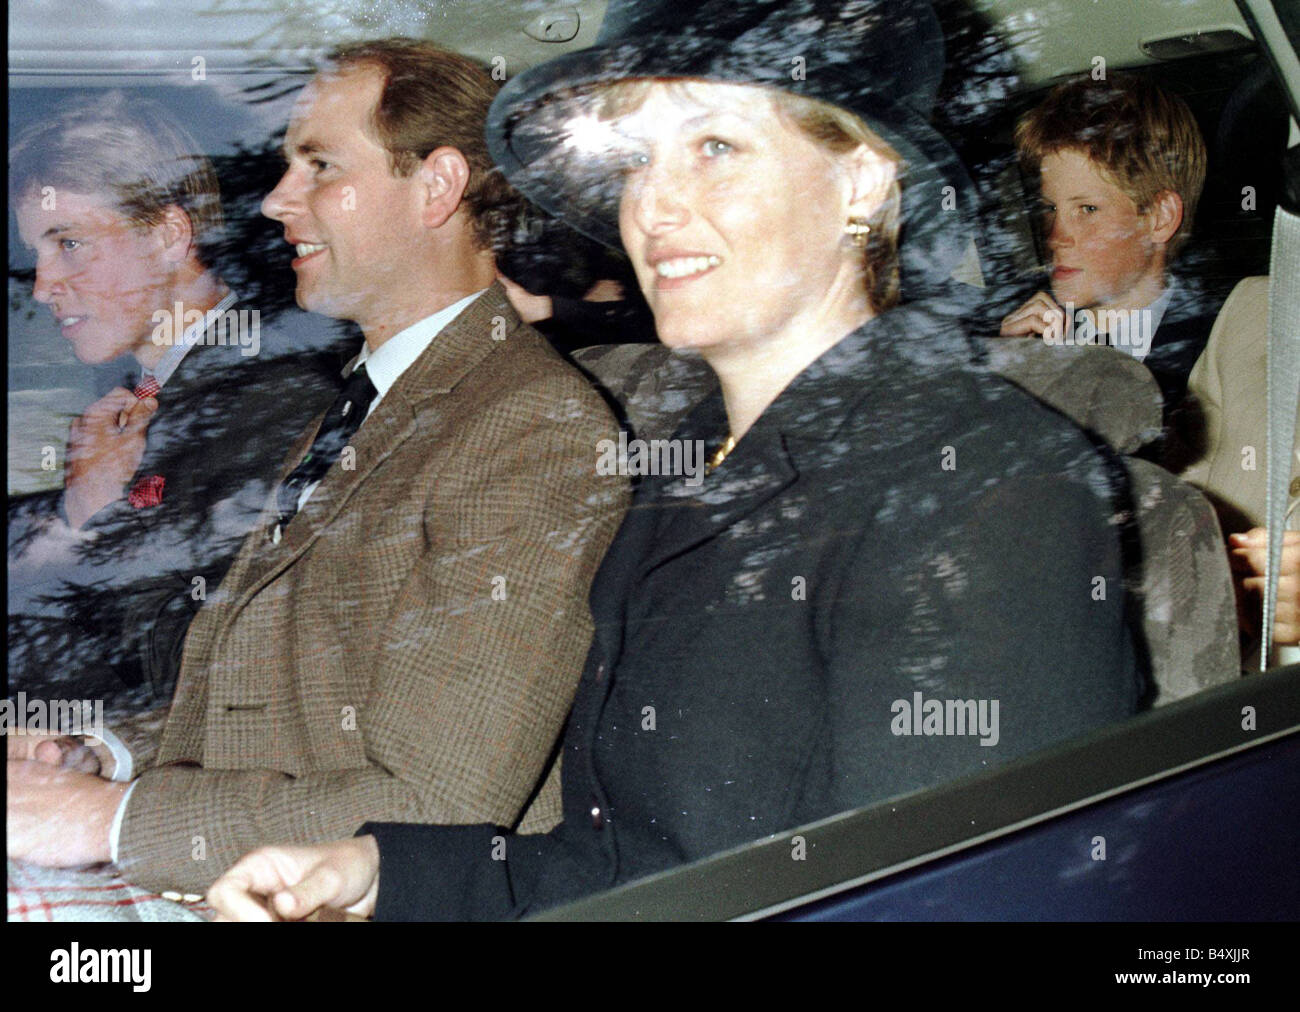 Prince William Prince Harry Prince Edward Sophie Rees Jones August 1998 in car going to Crathie Kirk Balmoral the day before the anniversary of Princess Diana s death Stock Photo